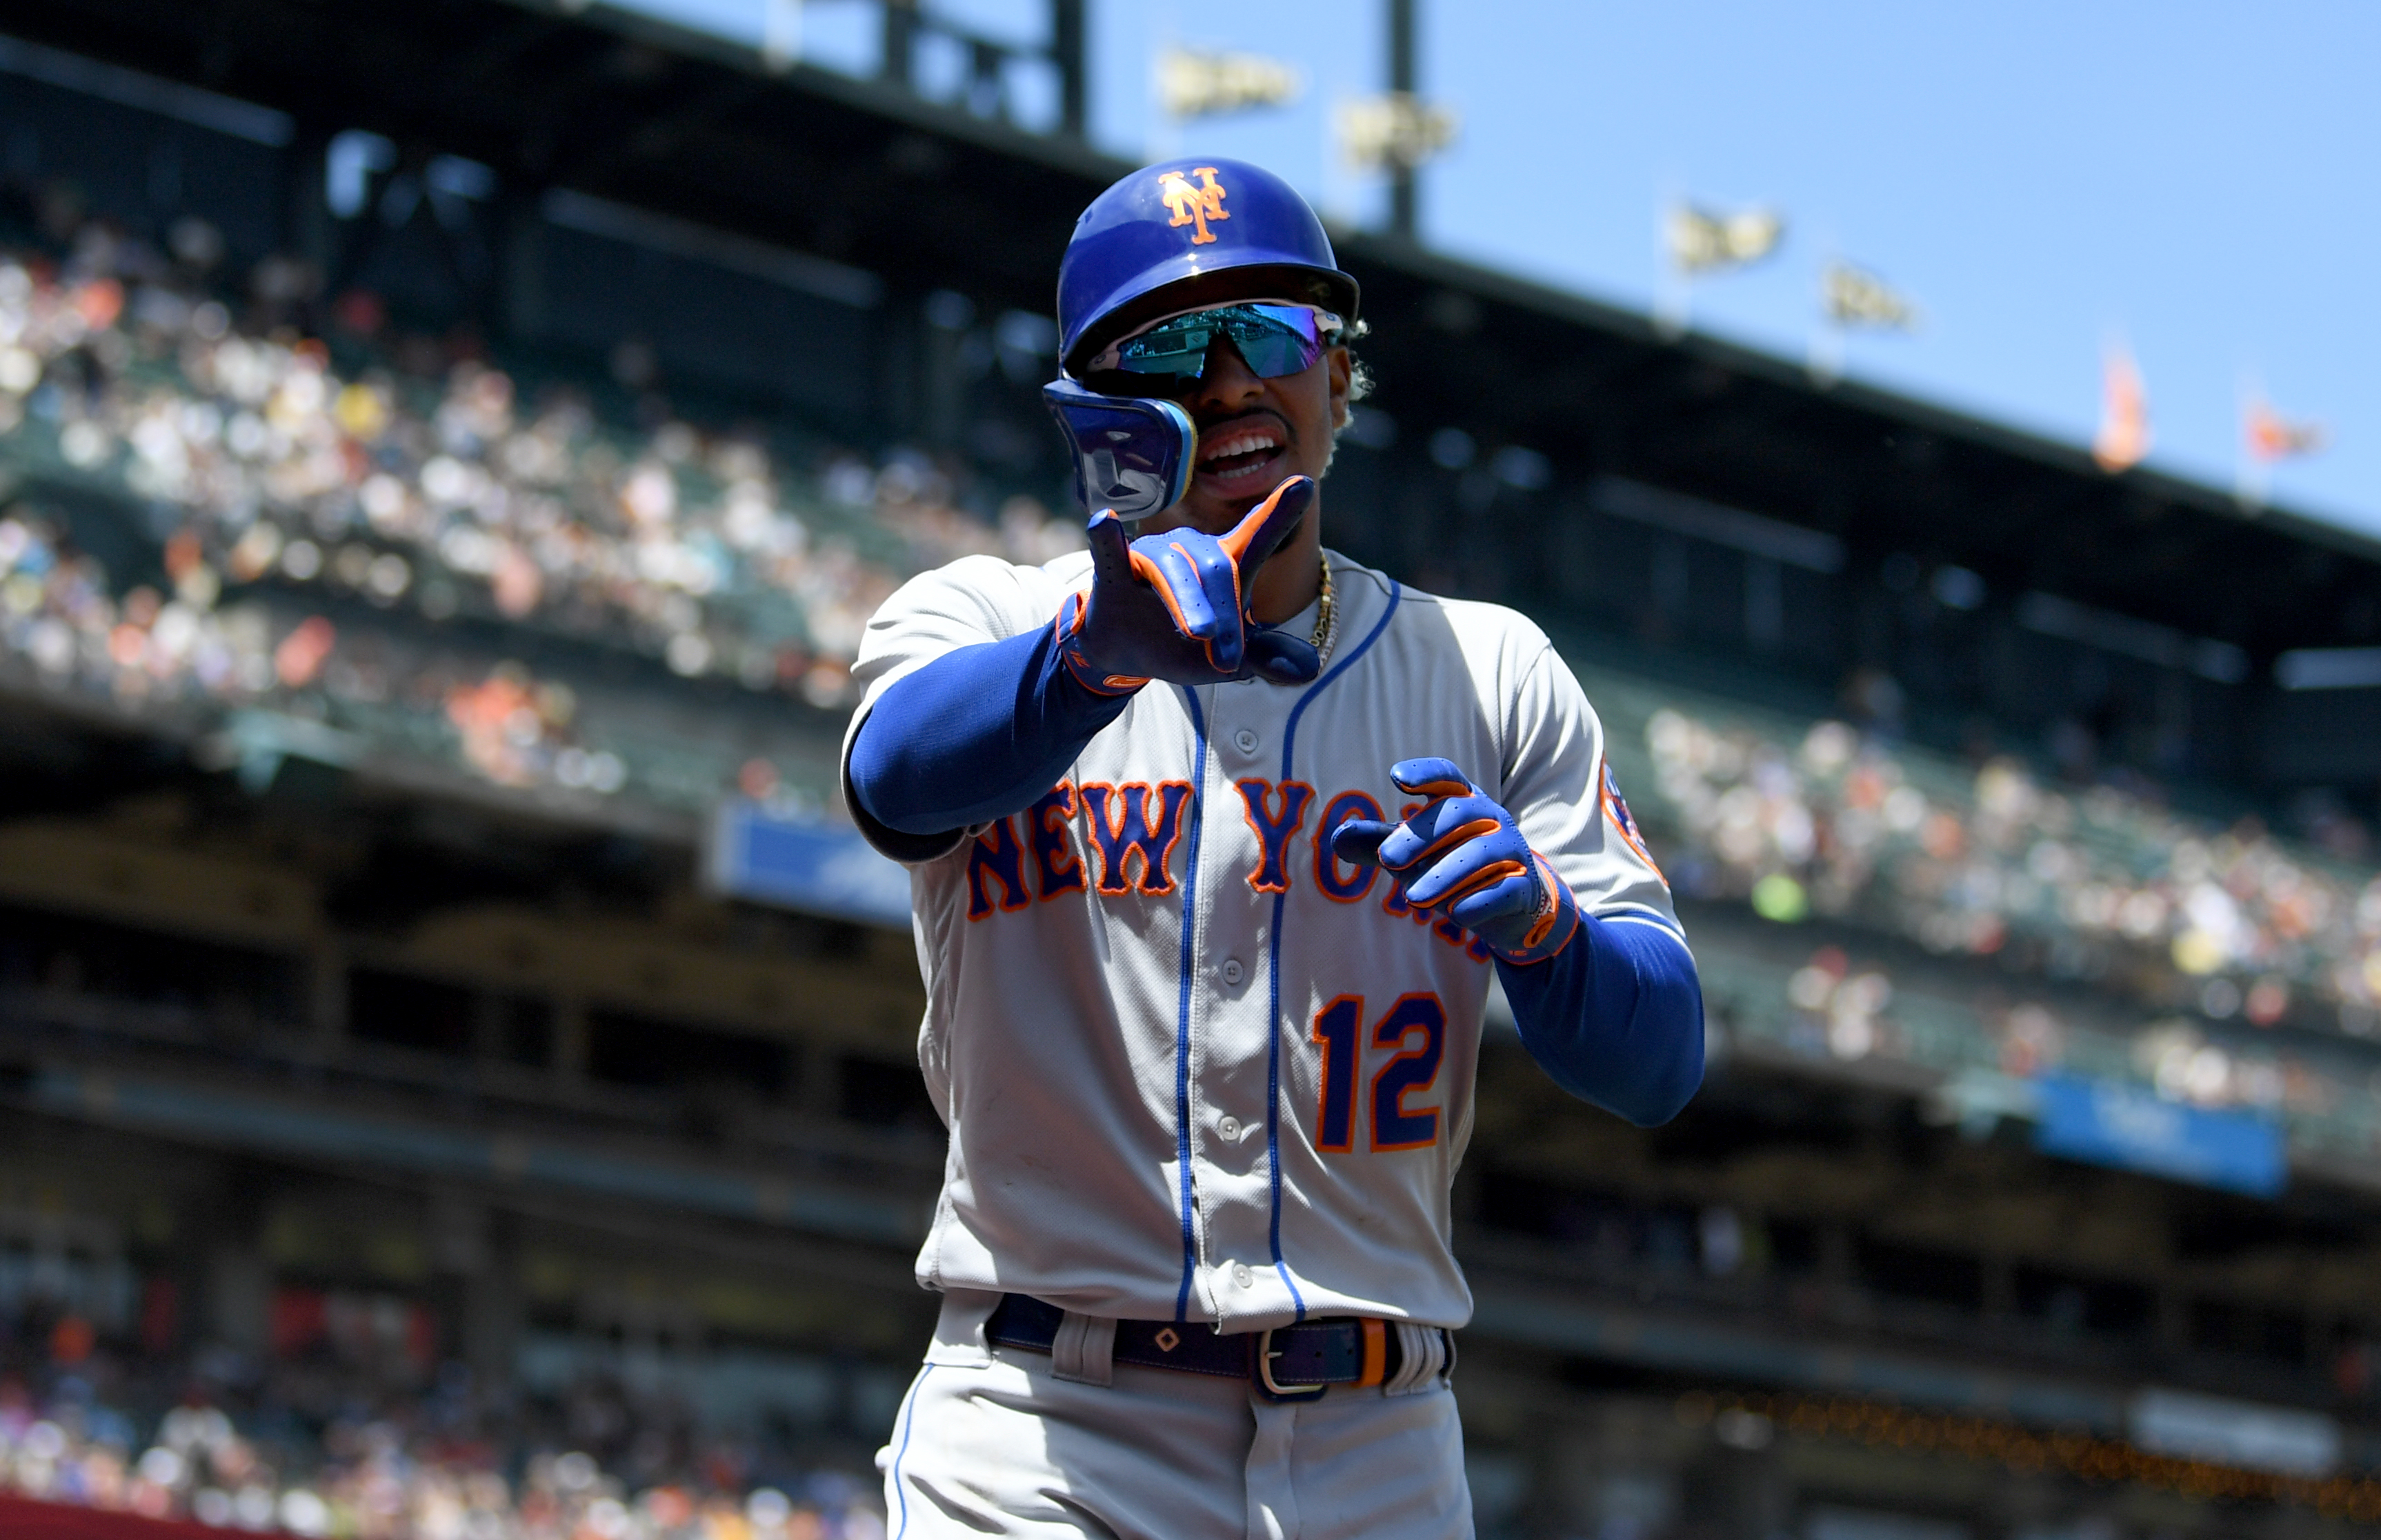 Mets routed by the Braves at Citi Field 7-0, Francisco Lindor's